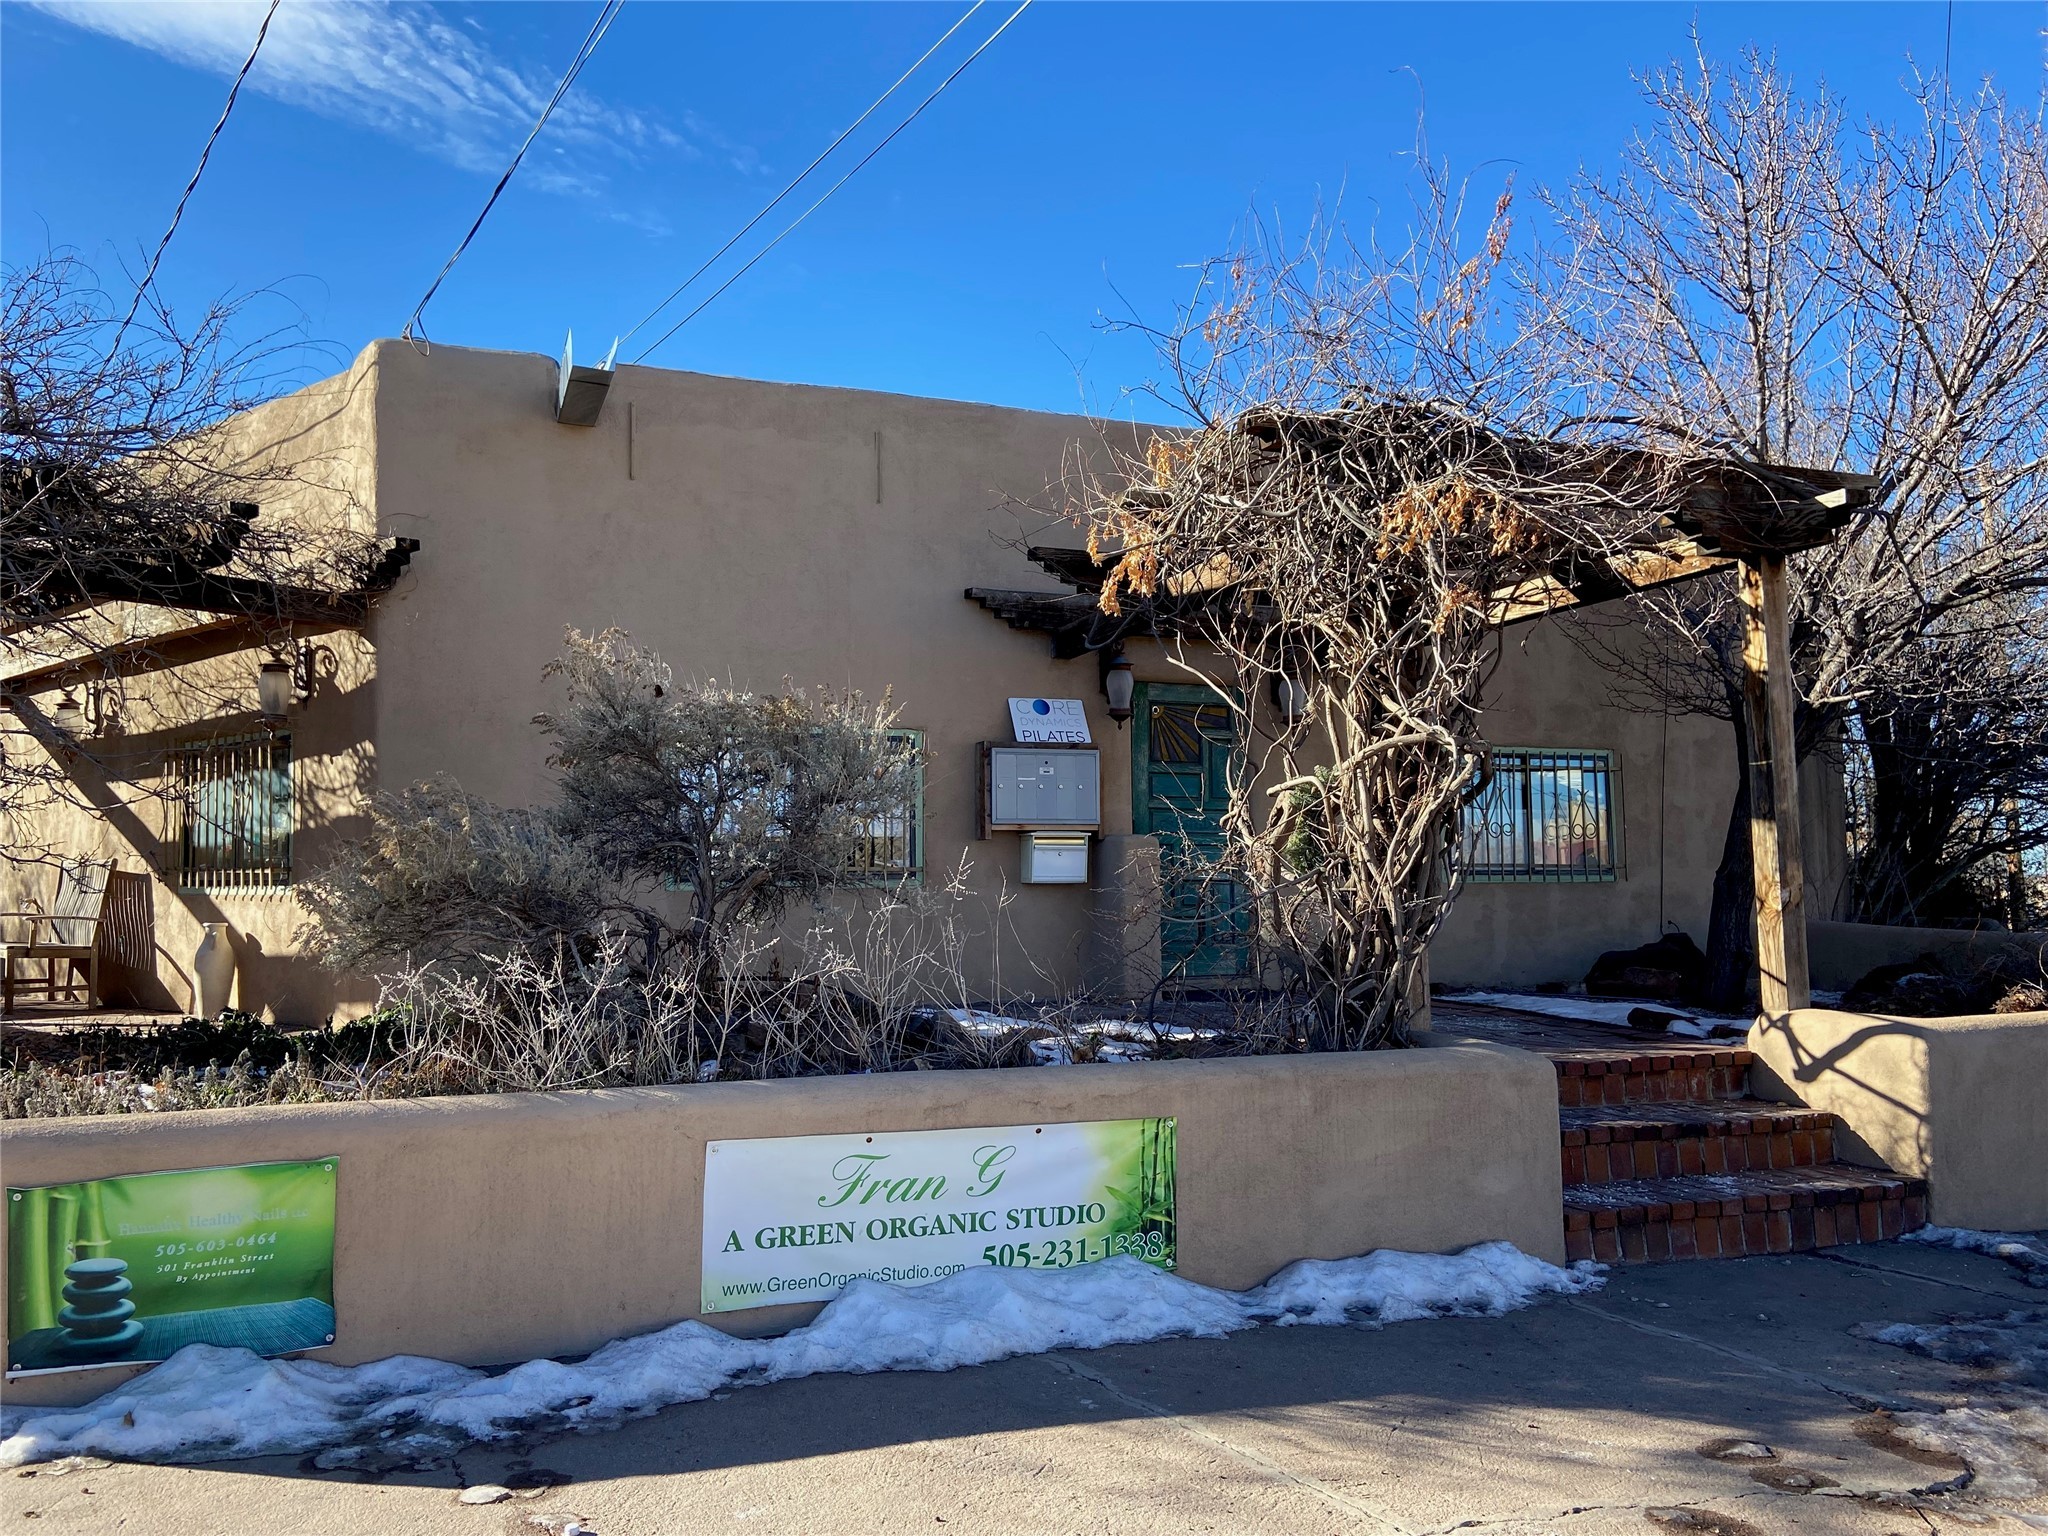 501 Franklin 14, Santa Fe, New Mexico 87501, ,Commercial Lease,For Rent,501 Franklin 14,202338700